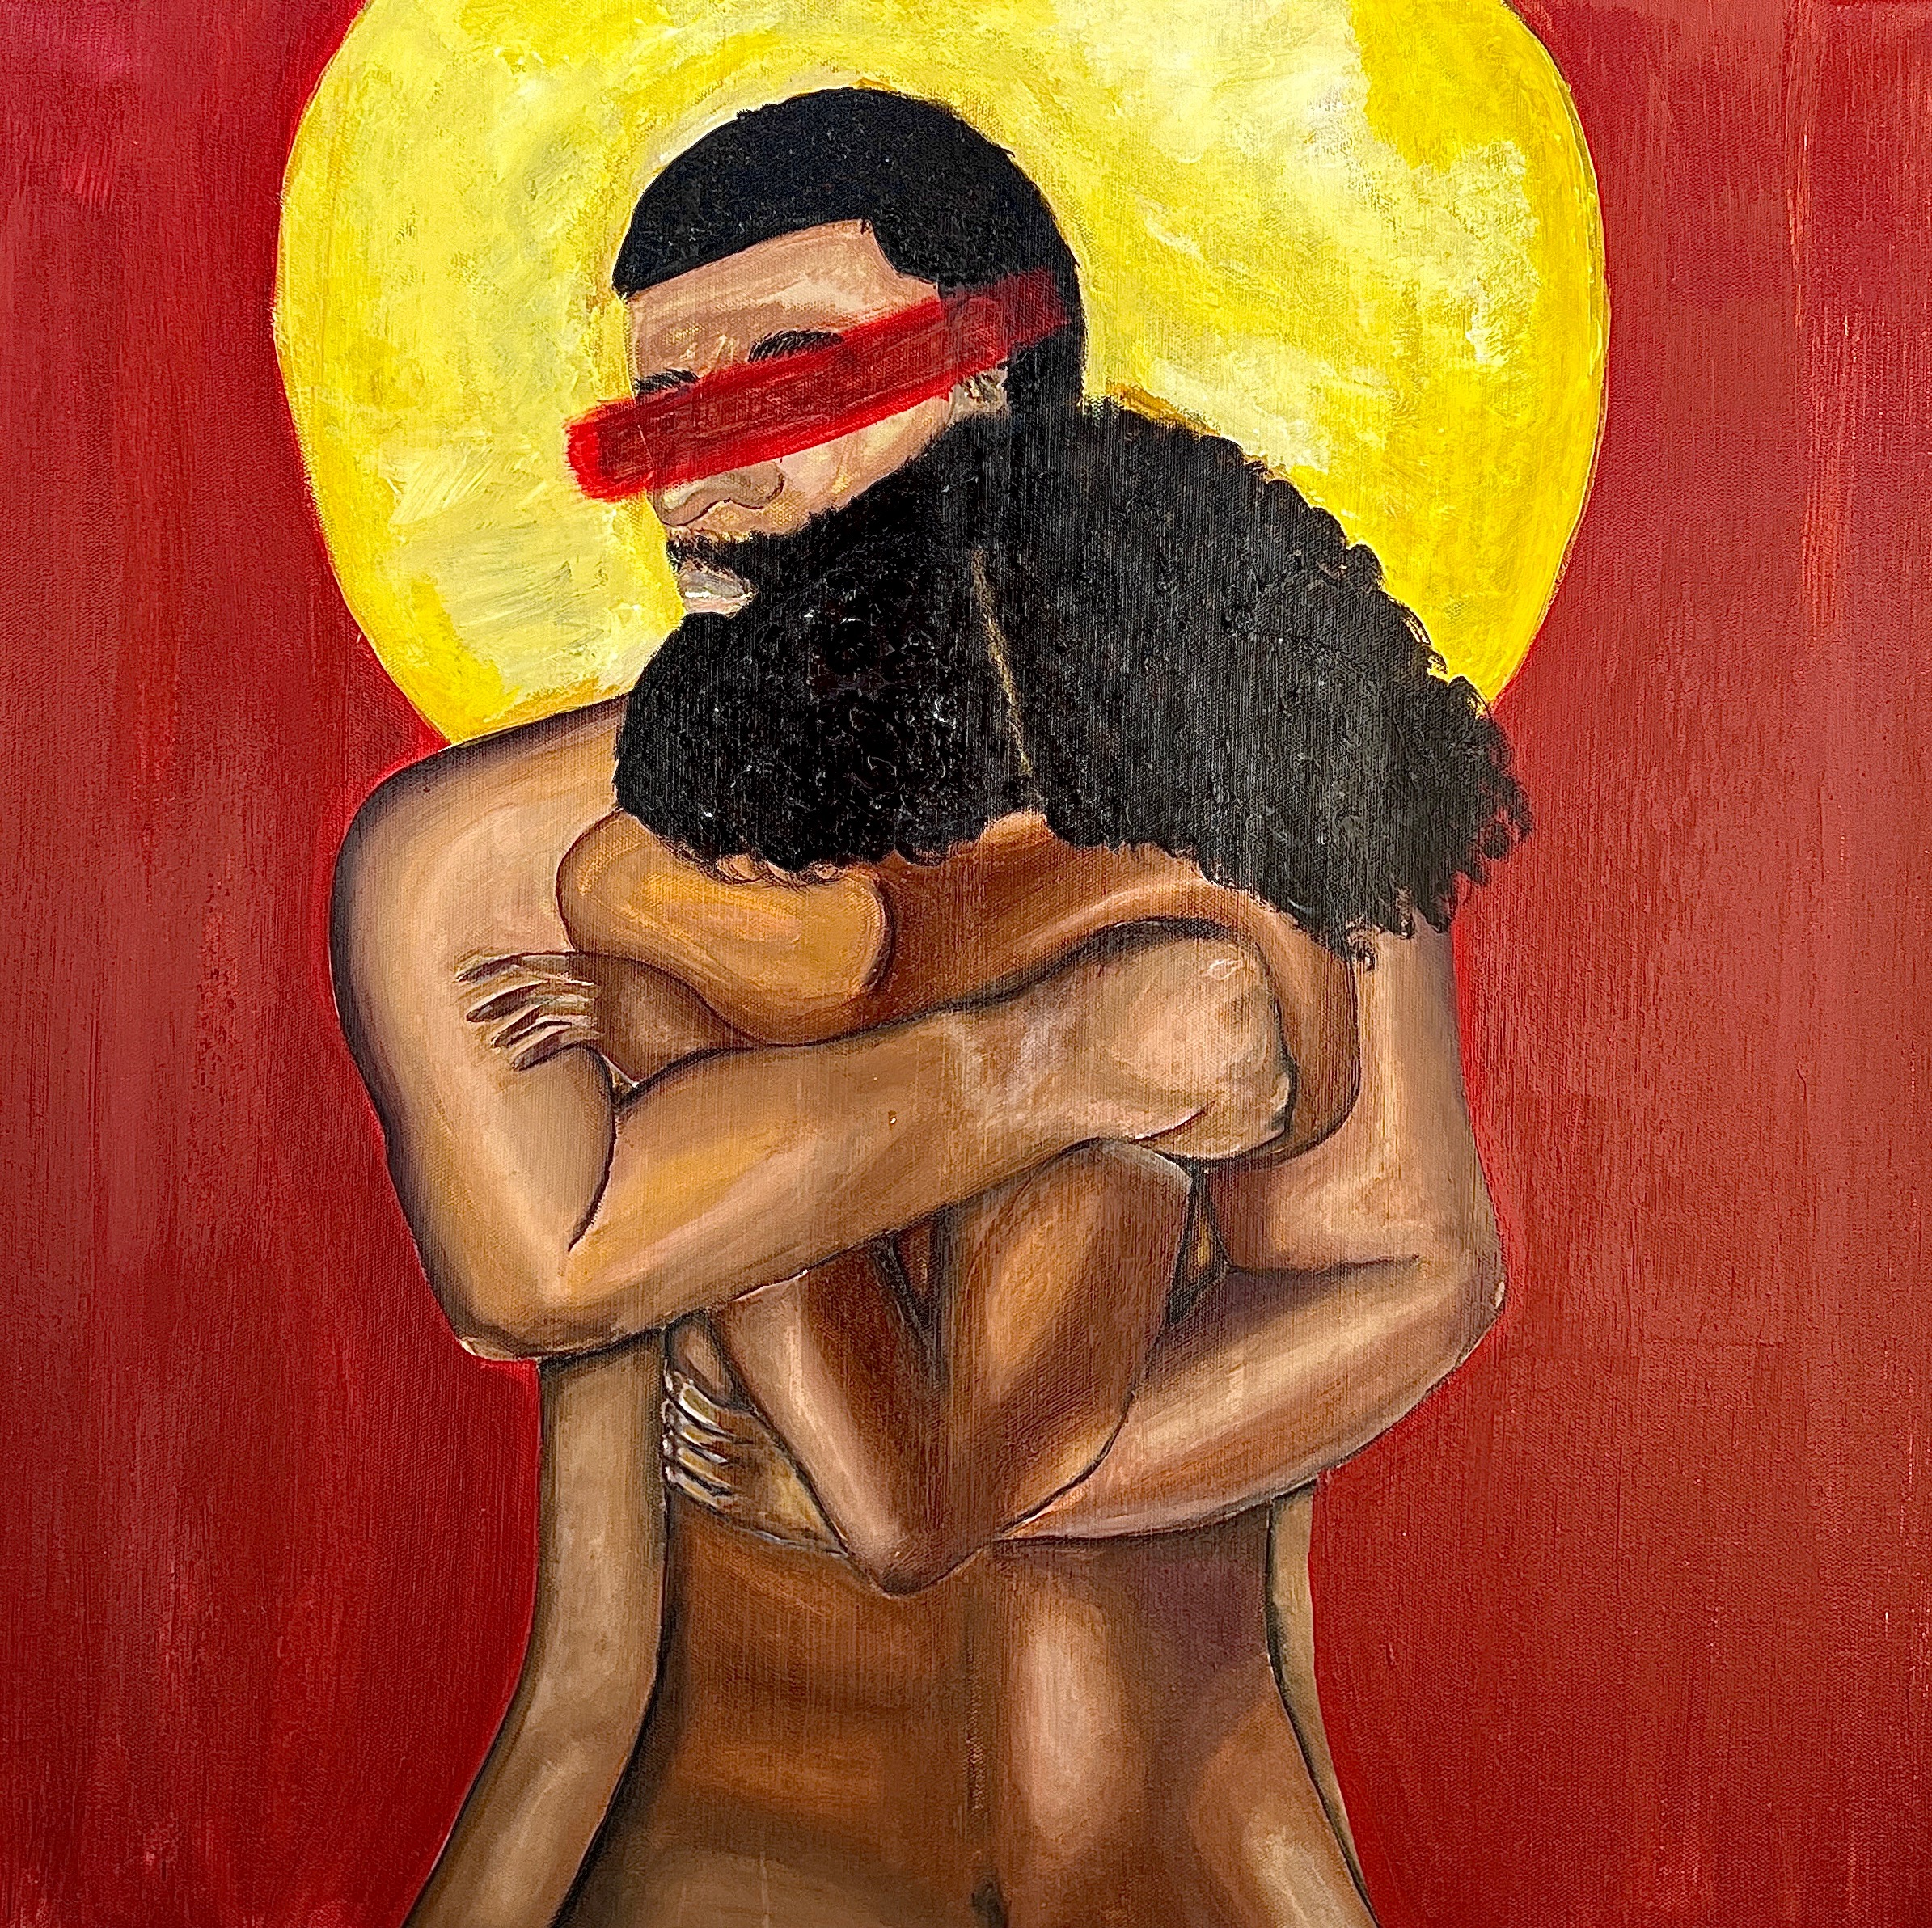 "Love is blind" 30 x 30 Acrylic (Jan. 29 '22) the concept behind this piece stemmed from what black history means and looks like to me. Black history is forgiveness, compassion, love and gentleness. i incorporated two darker toned people because unfortunately darker skinned people aren’t allowed to be soft, gentle or have feelings of distress. i highlighted that it’s okay to be black and need help. it’s okay to NOT be a “strong black woman” or a “strong black man”. Darker shade of red was incorporated to represent passion. the yellow moonlight represents light in the tiles of darkness or sadness. it’s a reminder that things do get better eventually. Black people have to continue to have blind love, blind compassion and blind forgiveness for one another. once we all come together to support and uplift each other we will be unstoppable